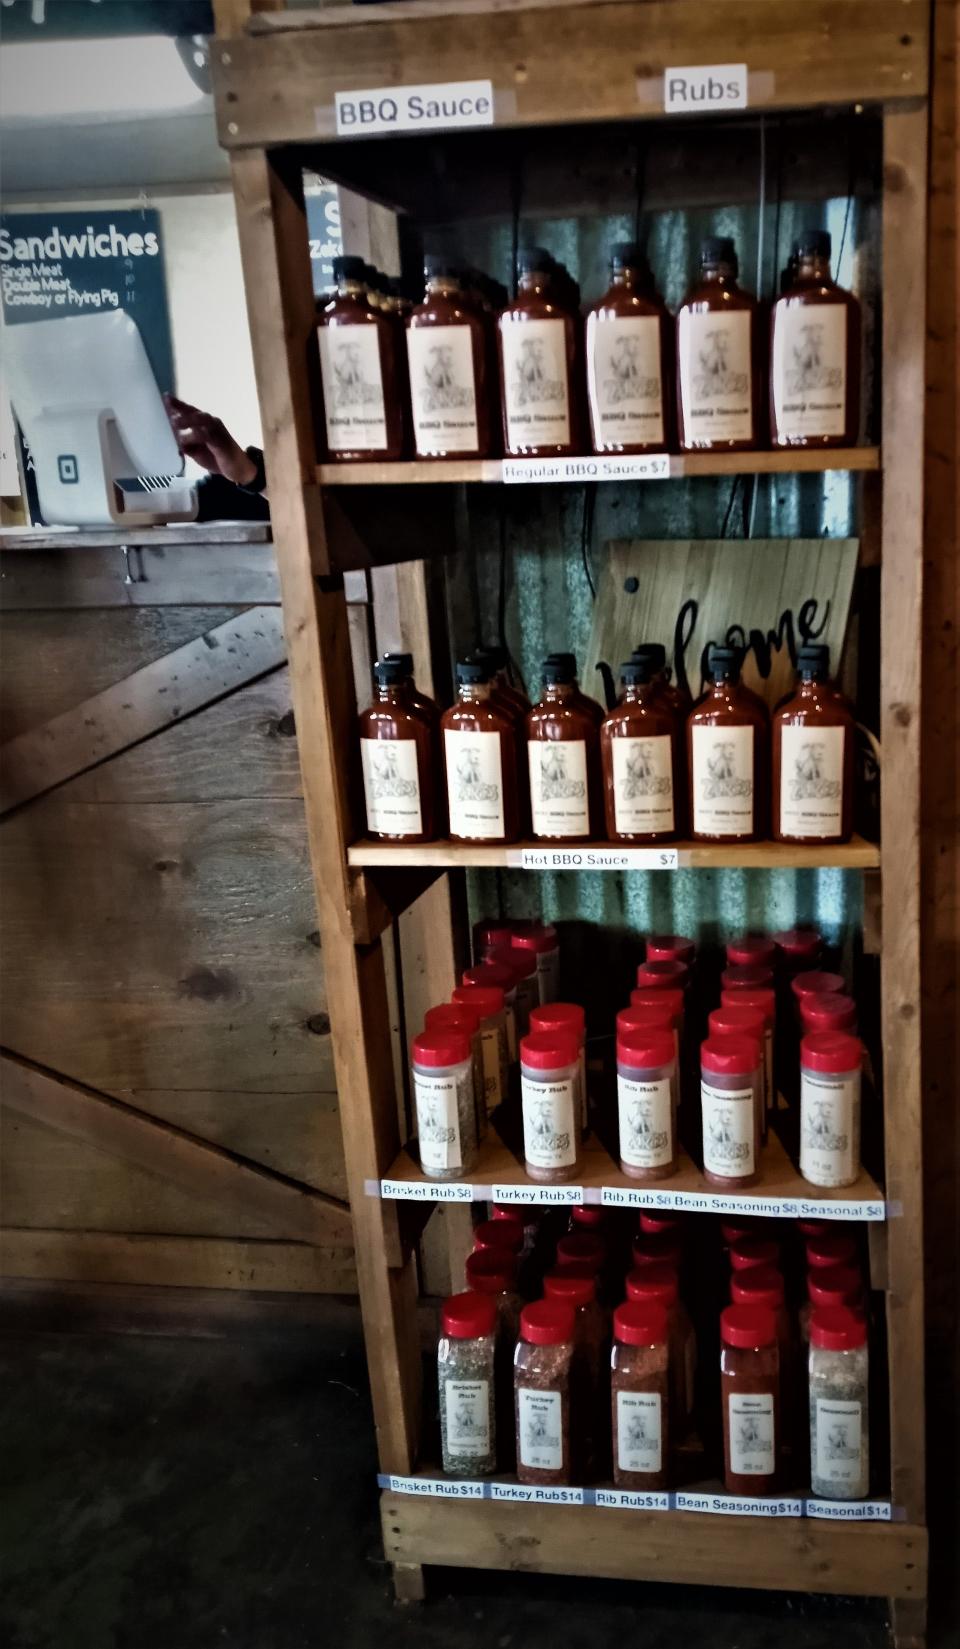 Zeke’s Barbecue Sauce, Brisket, Turkey and Rib Rub, Bean Seasoning and Seasonall are all for sale by the bottle or shaker.